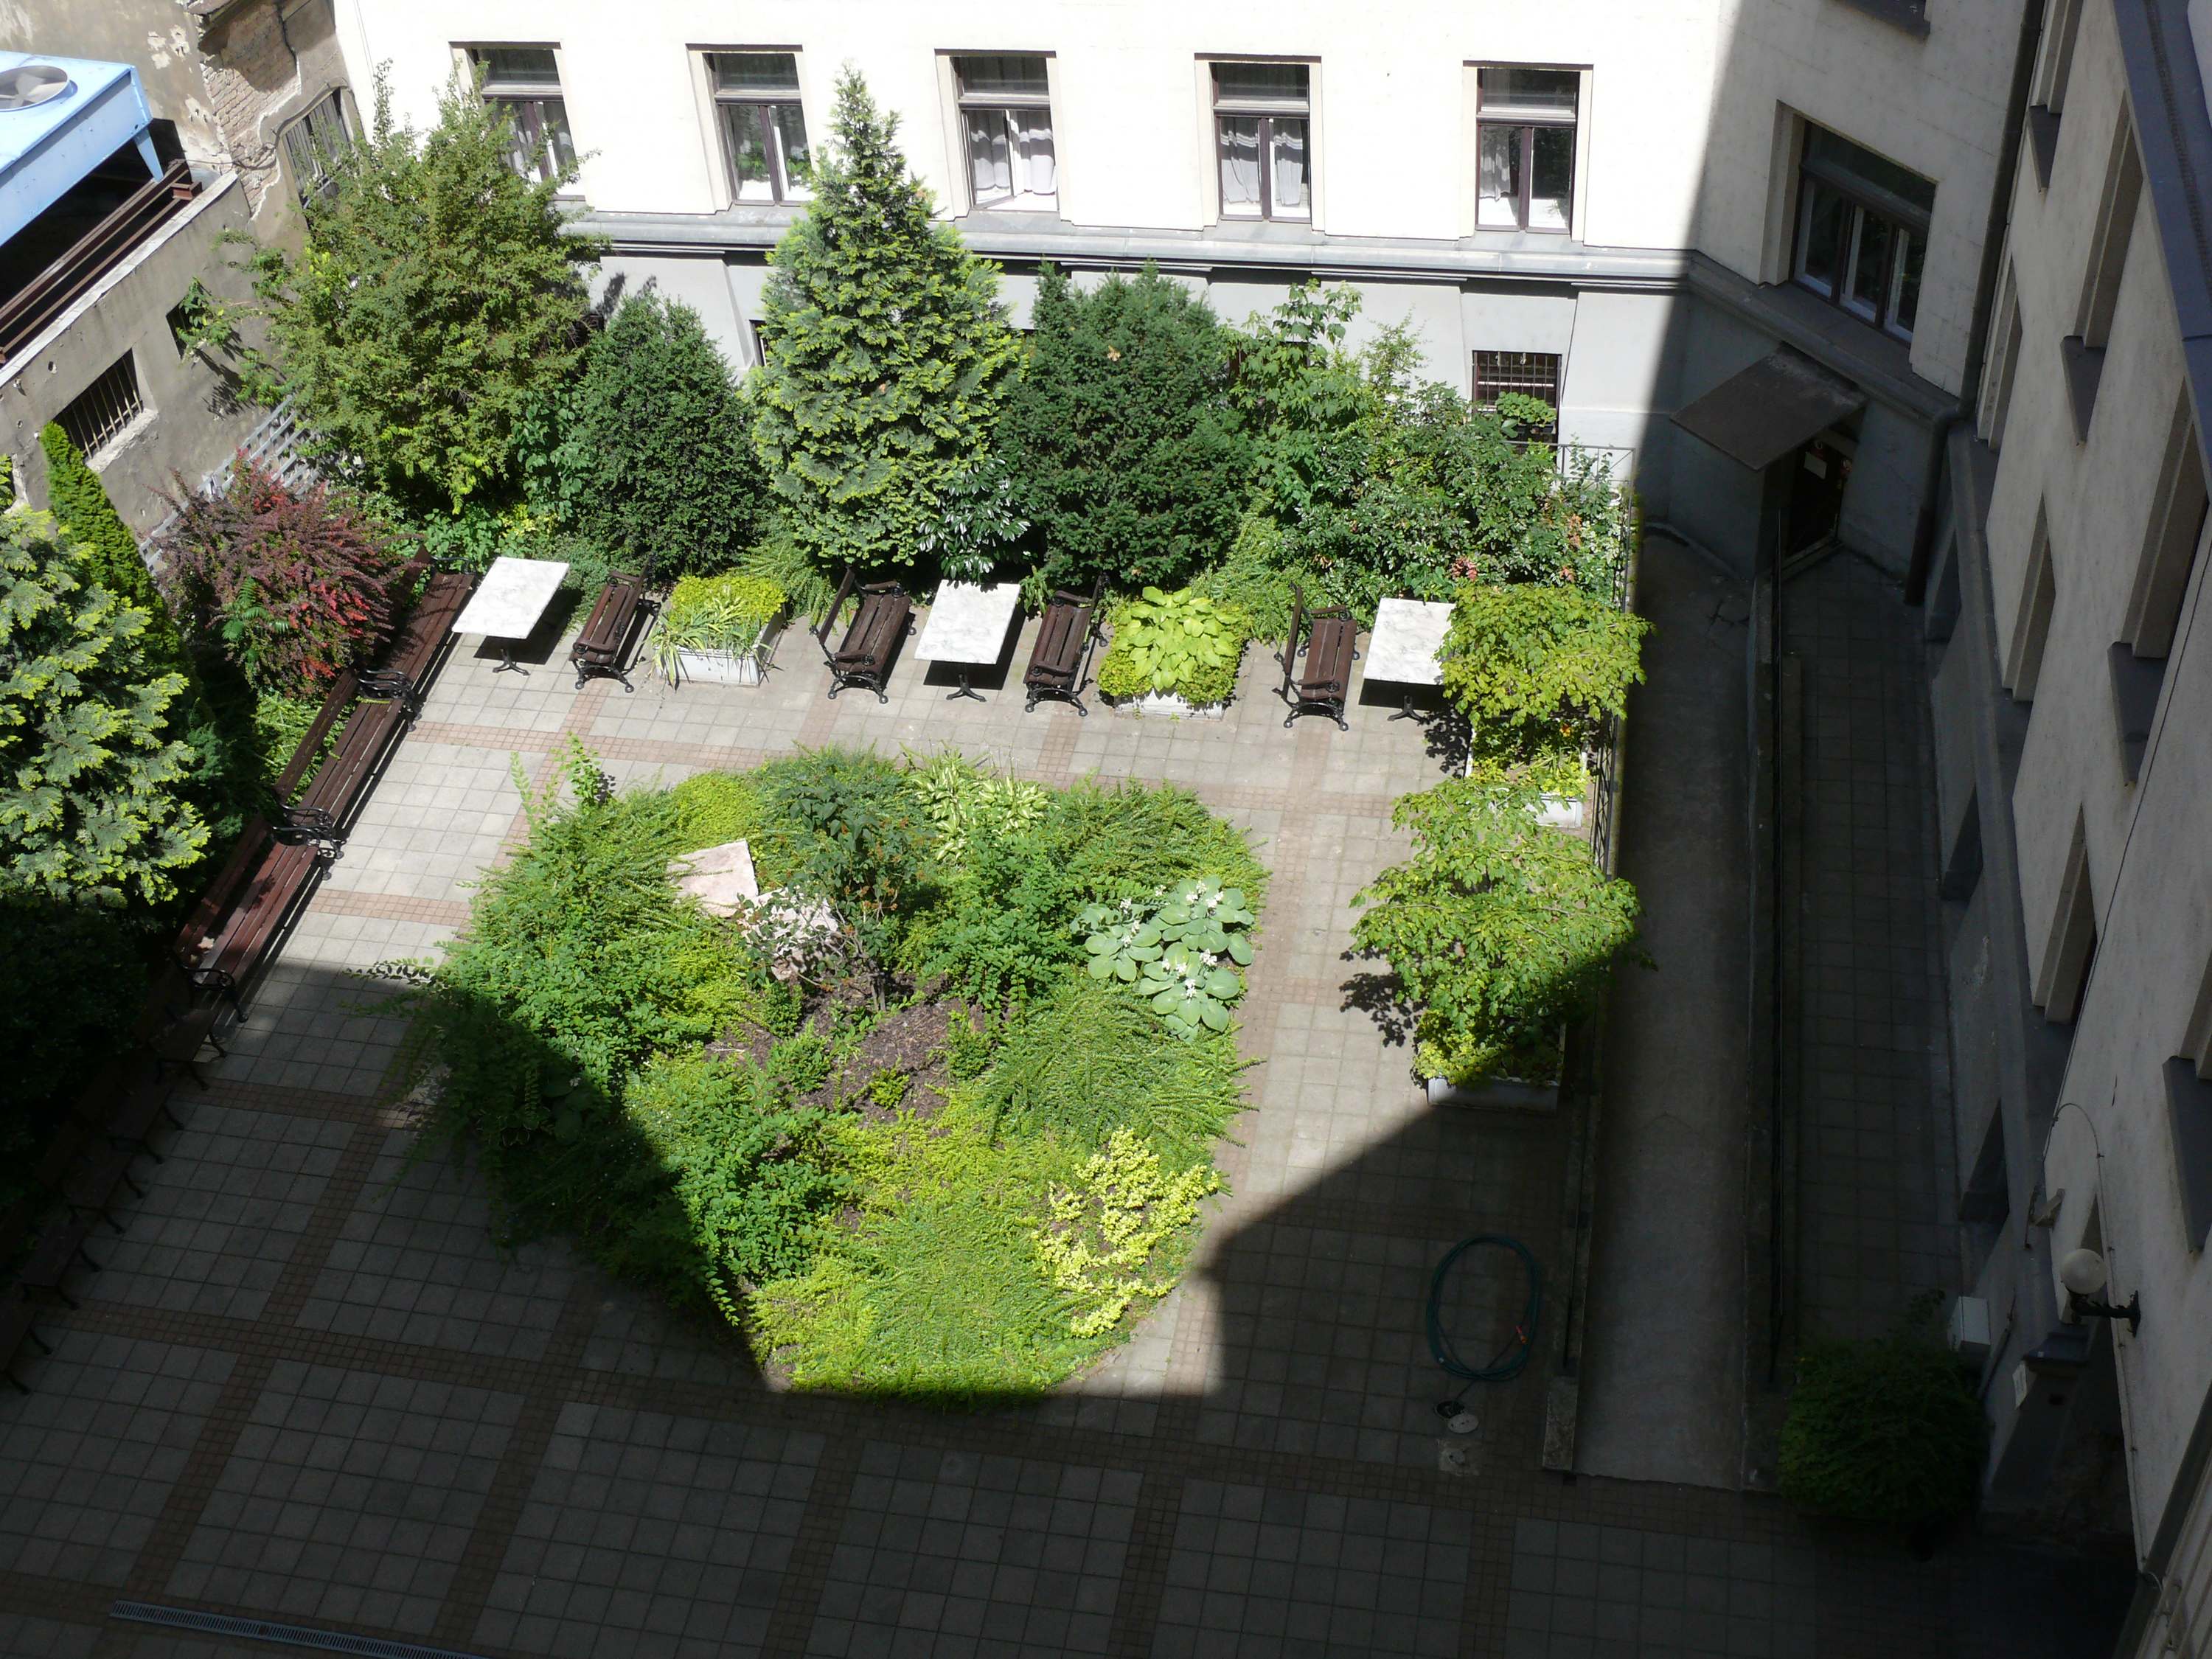 The beautiful inner garden of the University Library